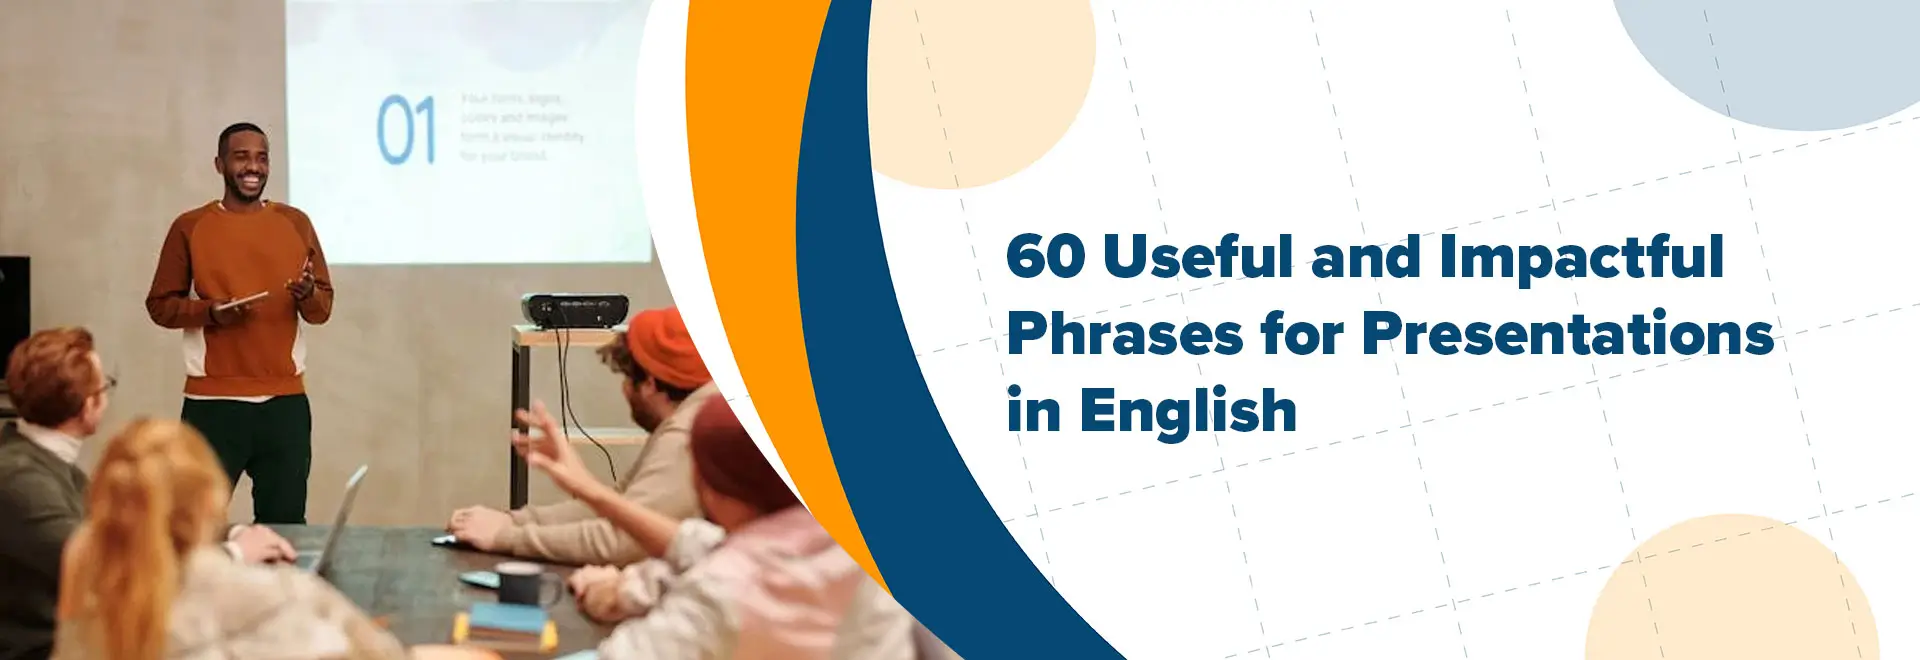 60 Useful and Impactful Phrases for Presentations in English